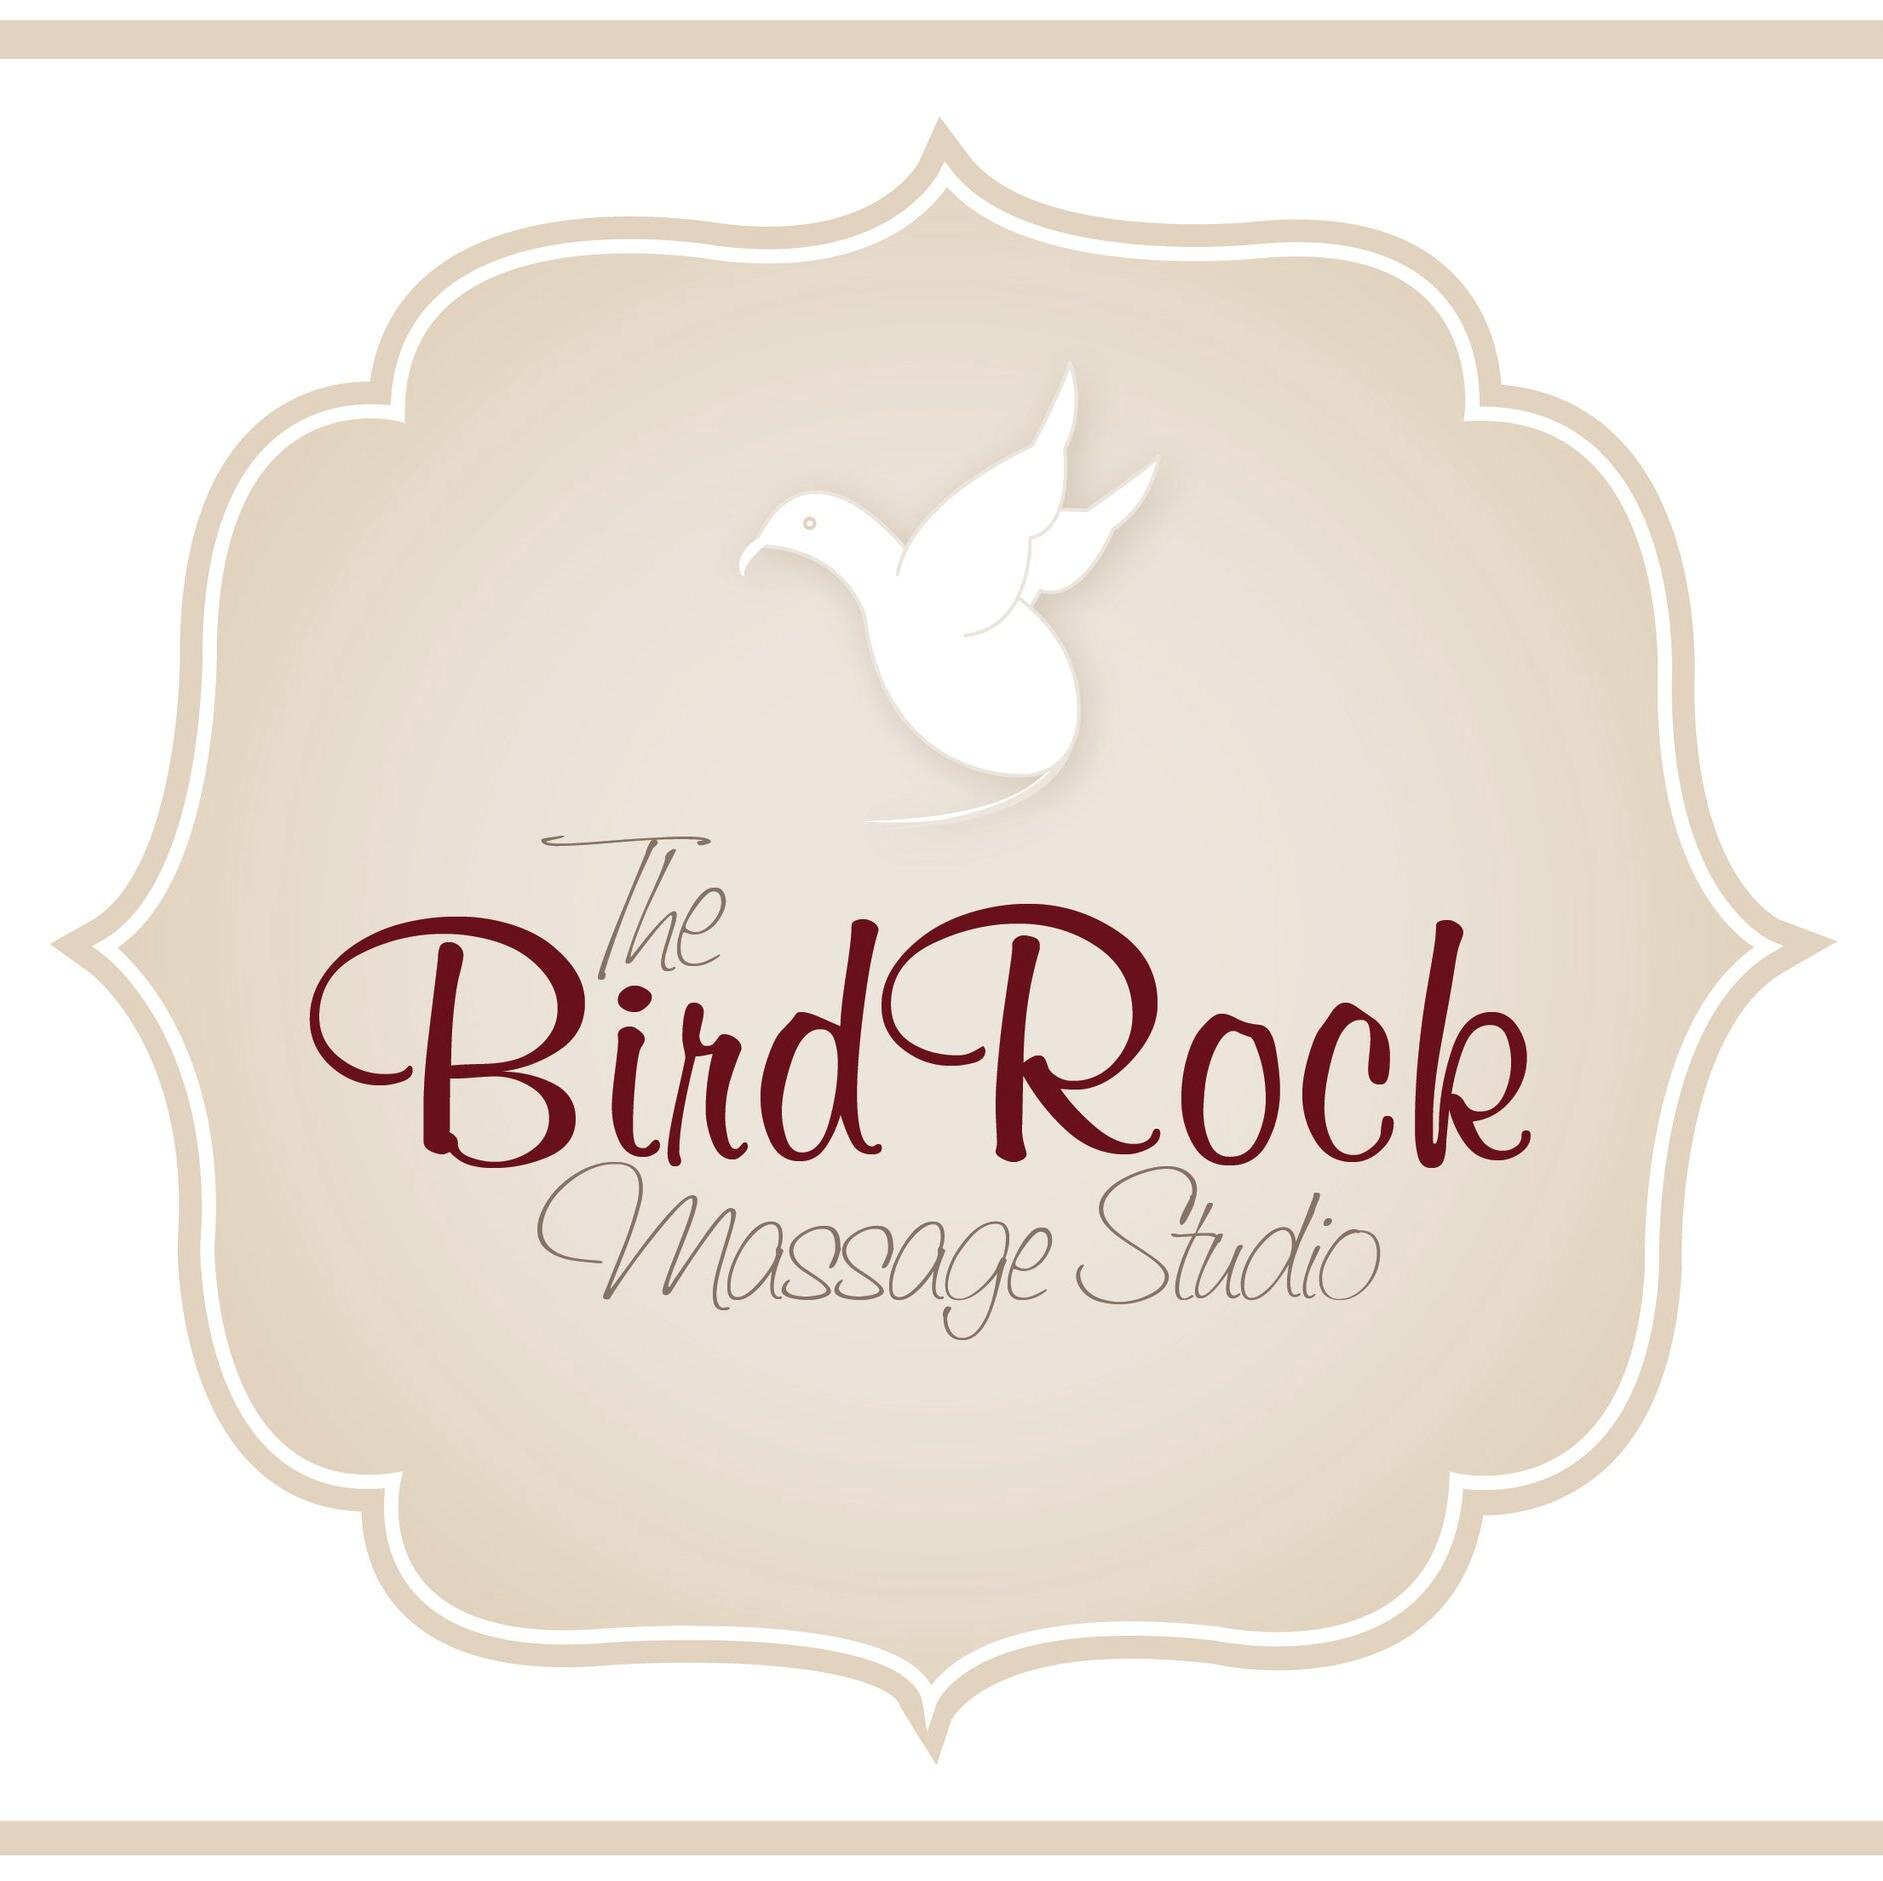 Experience tranquility and relaxation with a customized massage from Bird Rock!